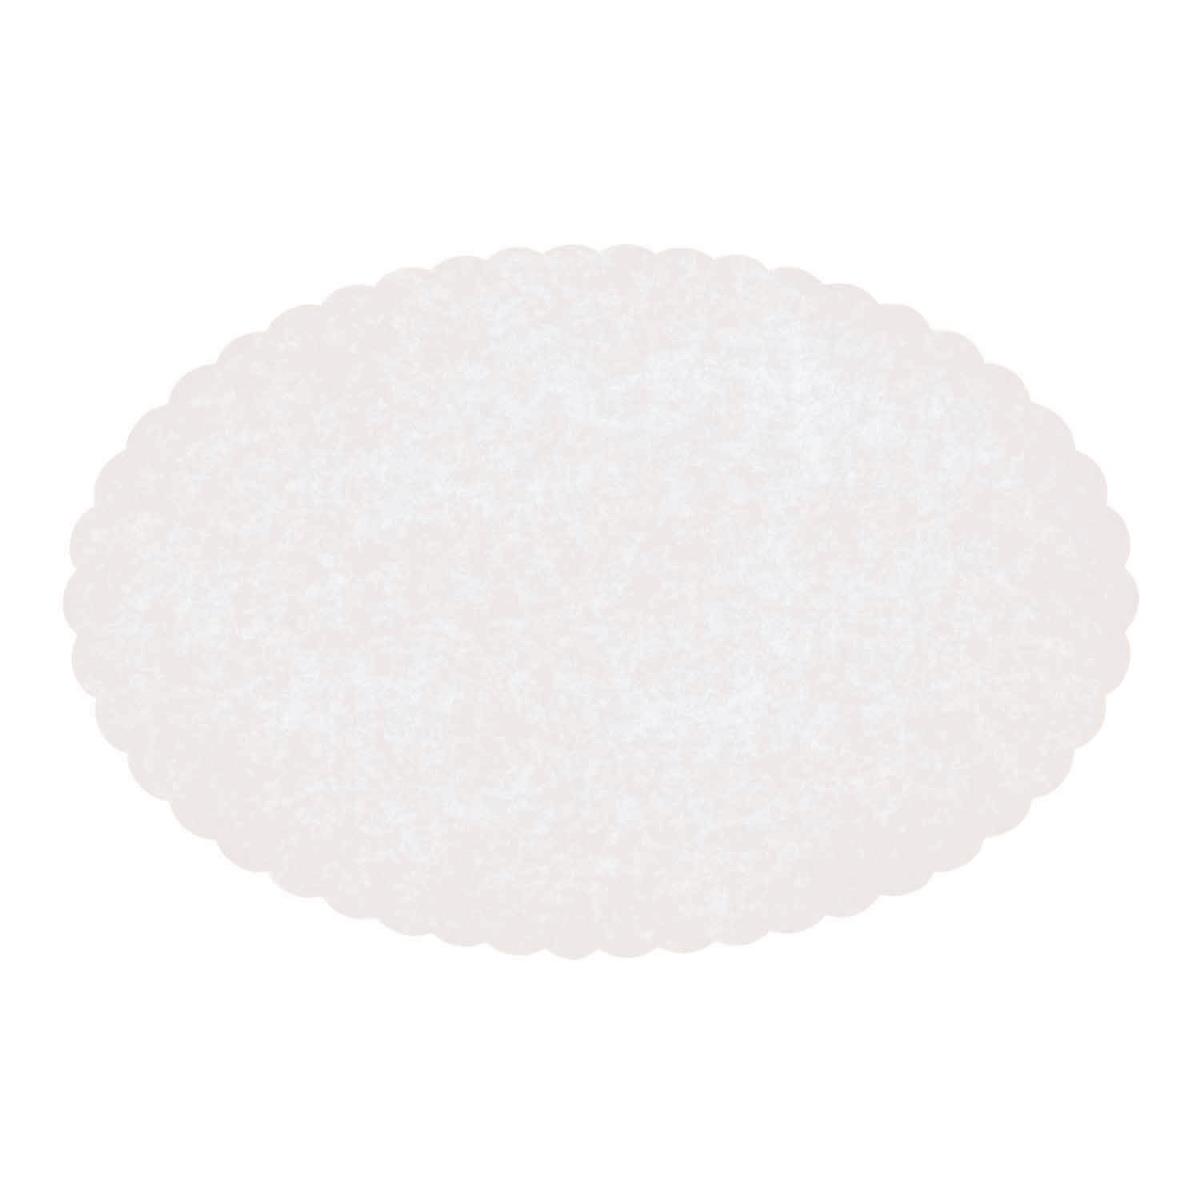 327133 Pec 6 X 9 In. Oval Scalloped Doilies, White - Pack Of 2000